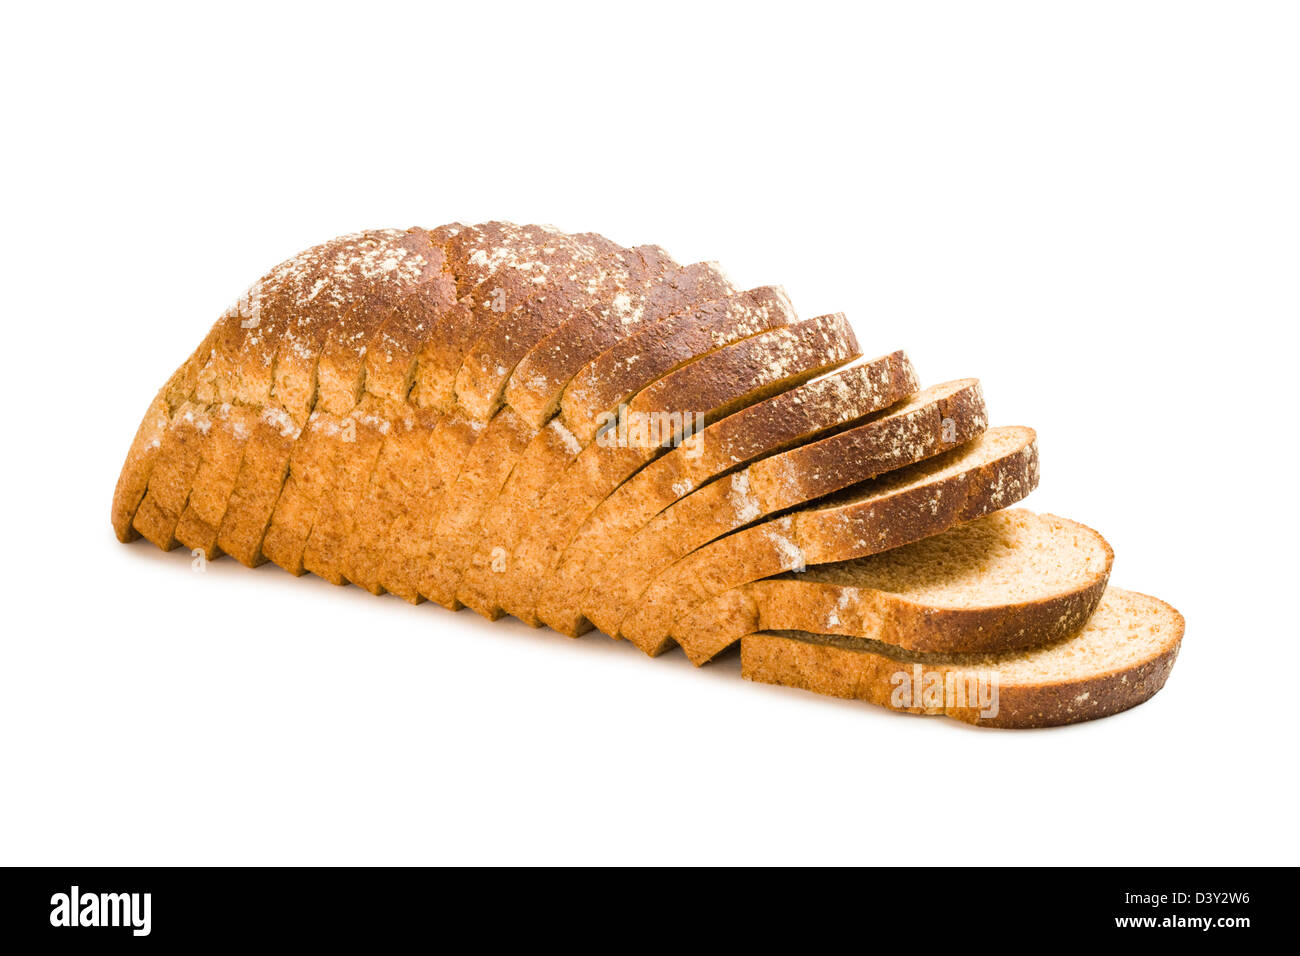 Loaf of sliced brown (wholemeal) bread. Stock Photo